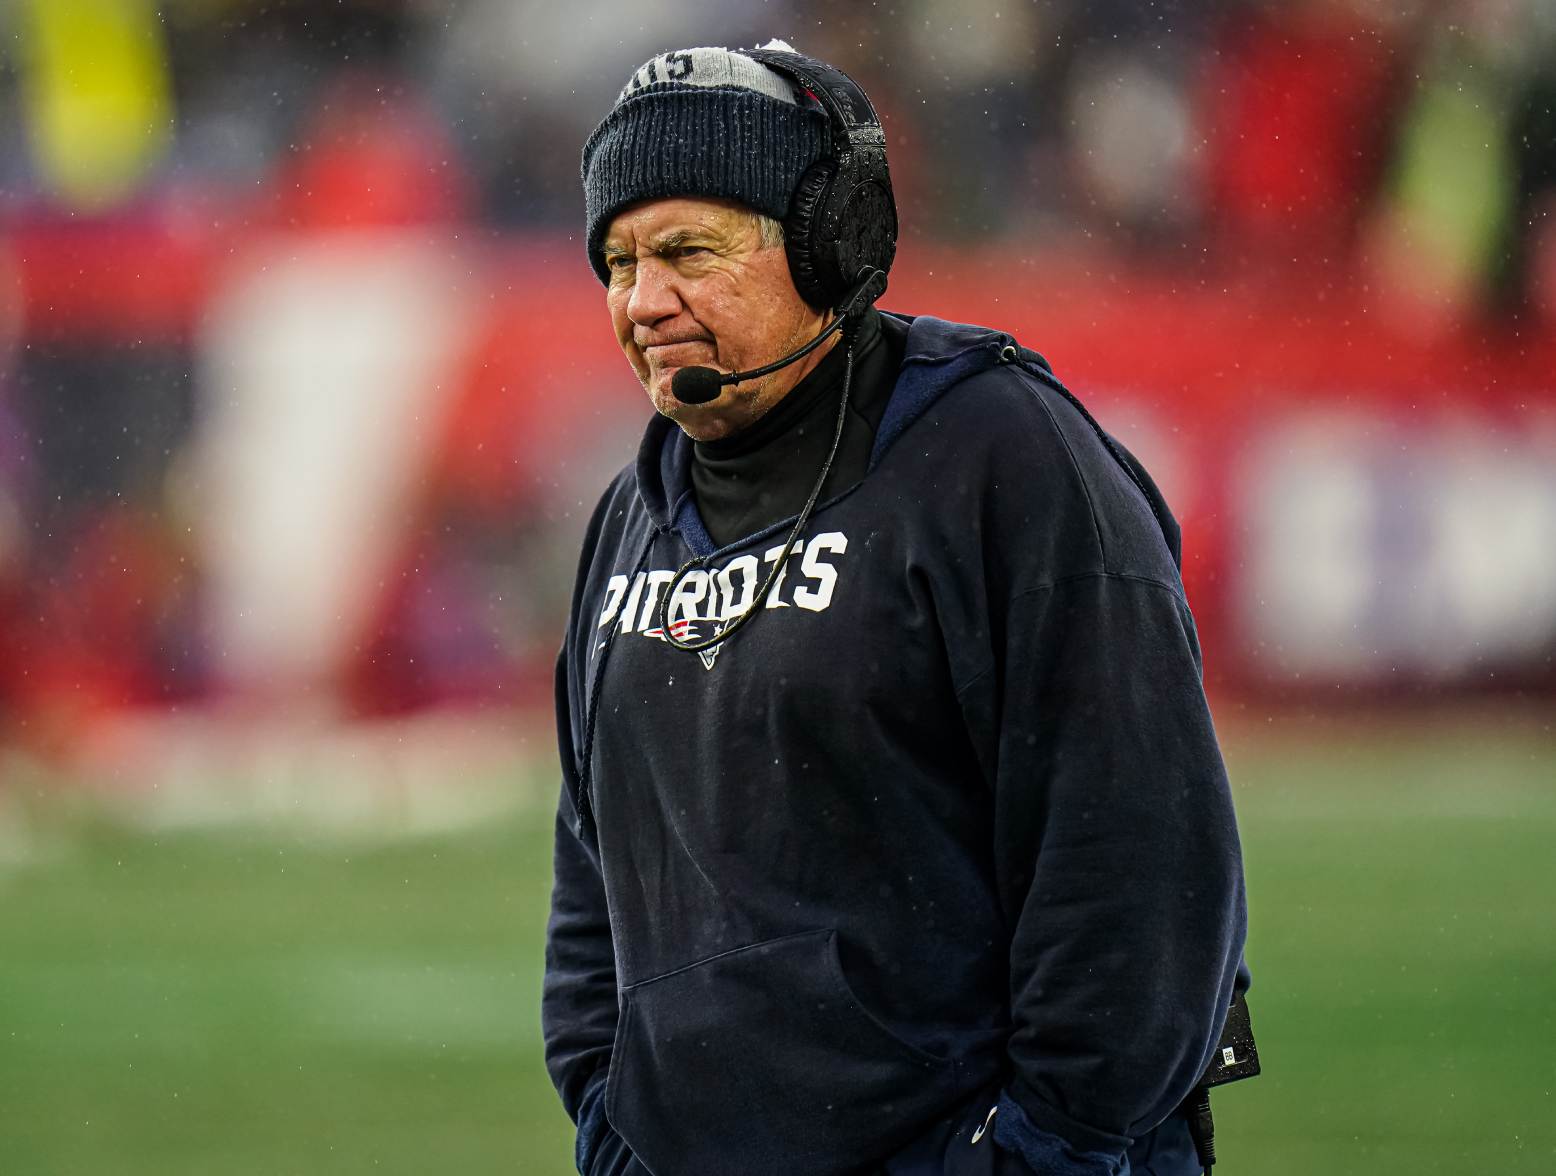 Bill Belichick may no longer be the head coach when the Patriots draft picks are finalized.